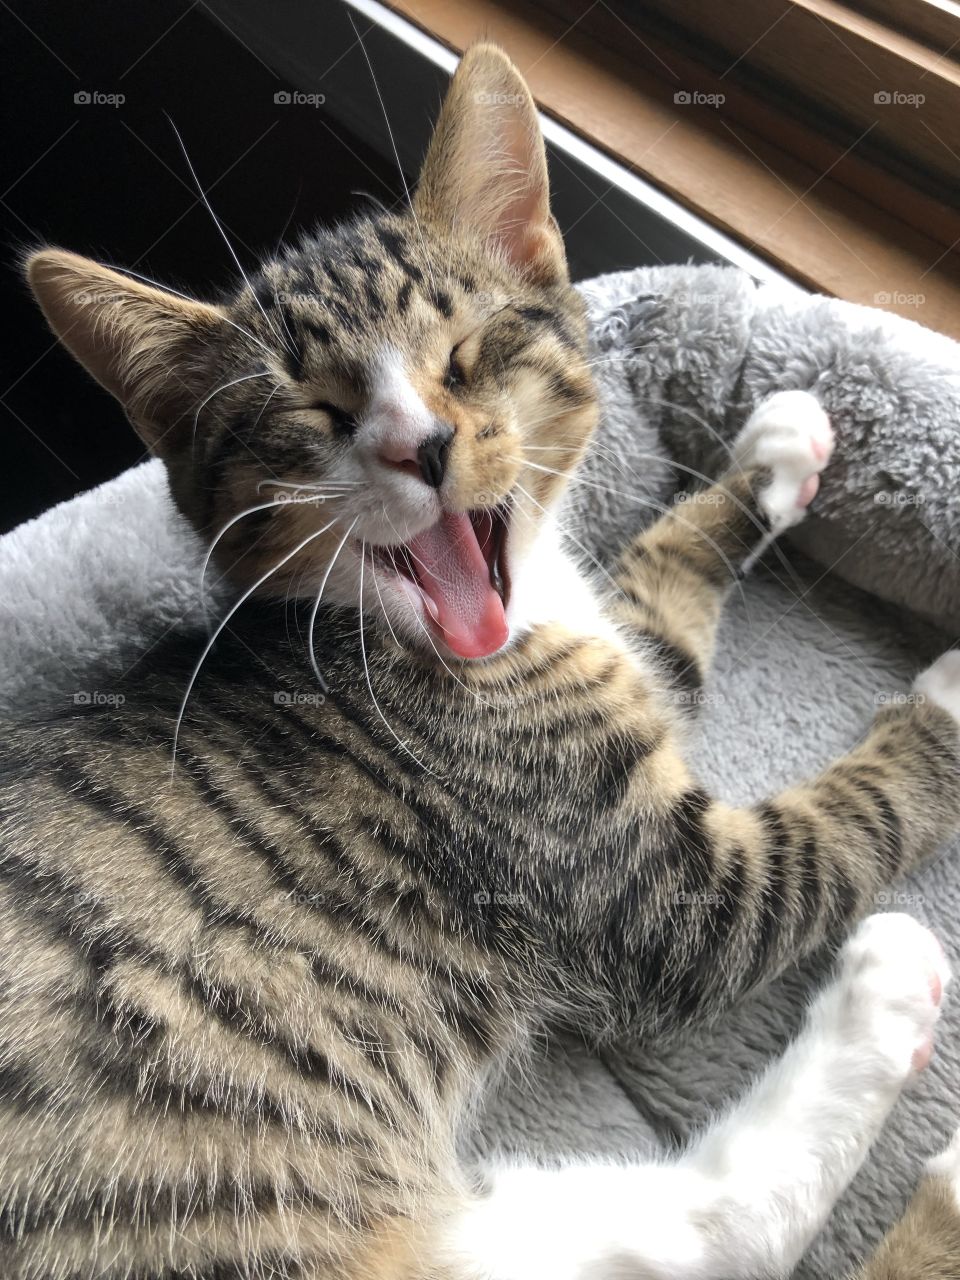 Sleepy striped kitten yawning in his bed